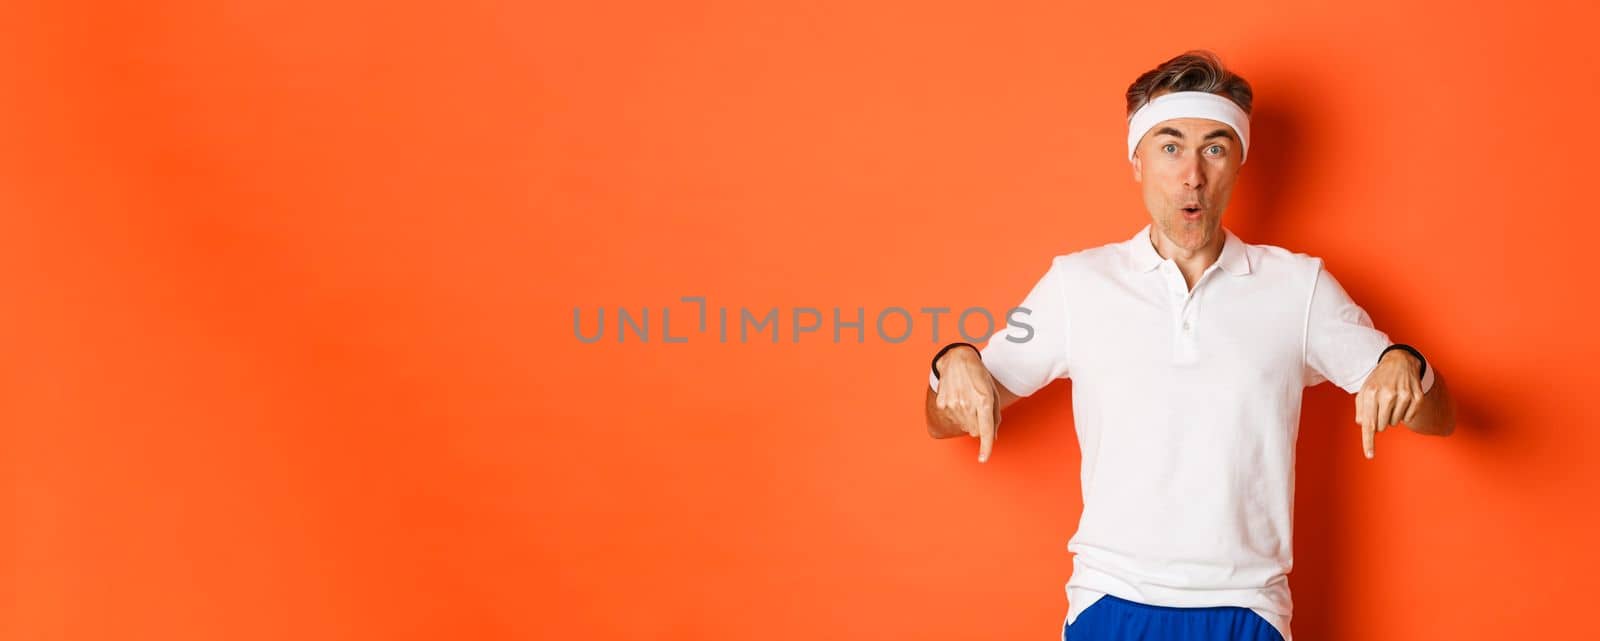 Concept of workout, sports and lifestyle. Portrait of surprised middle-aged male athlete, wearing clothes for gym, pointing fingers down and looking amazed, standing over orange background.